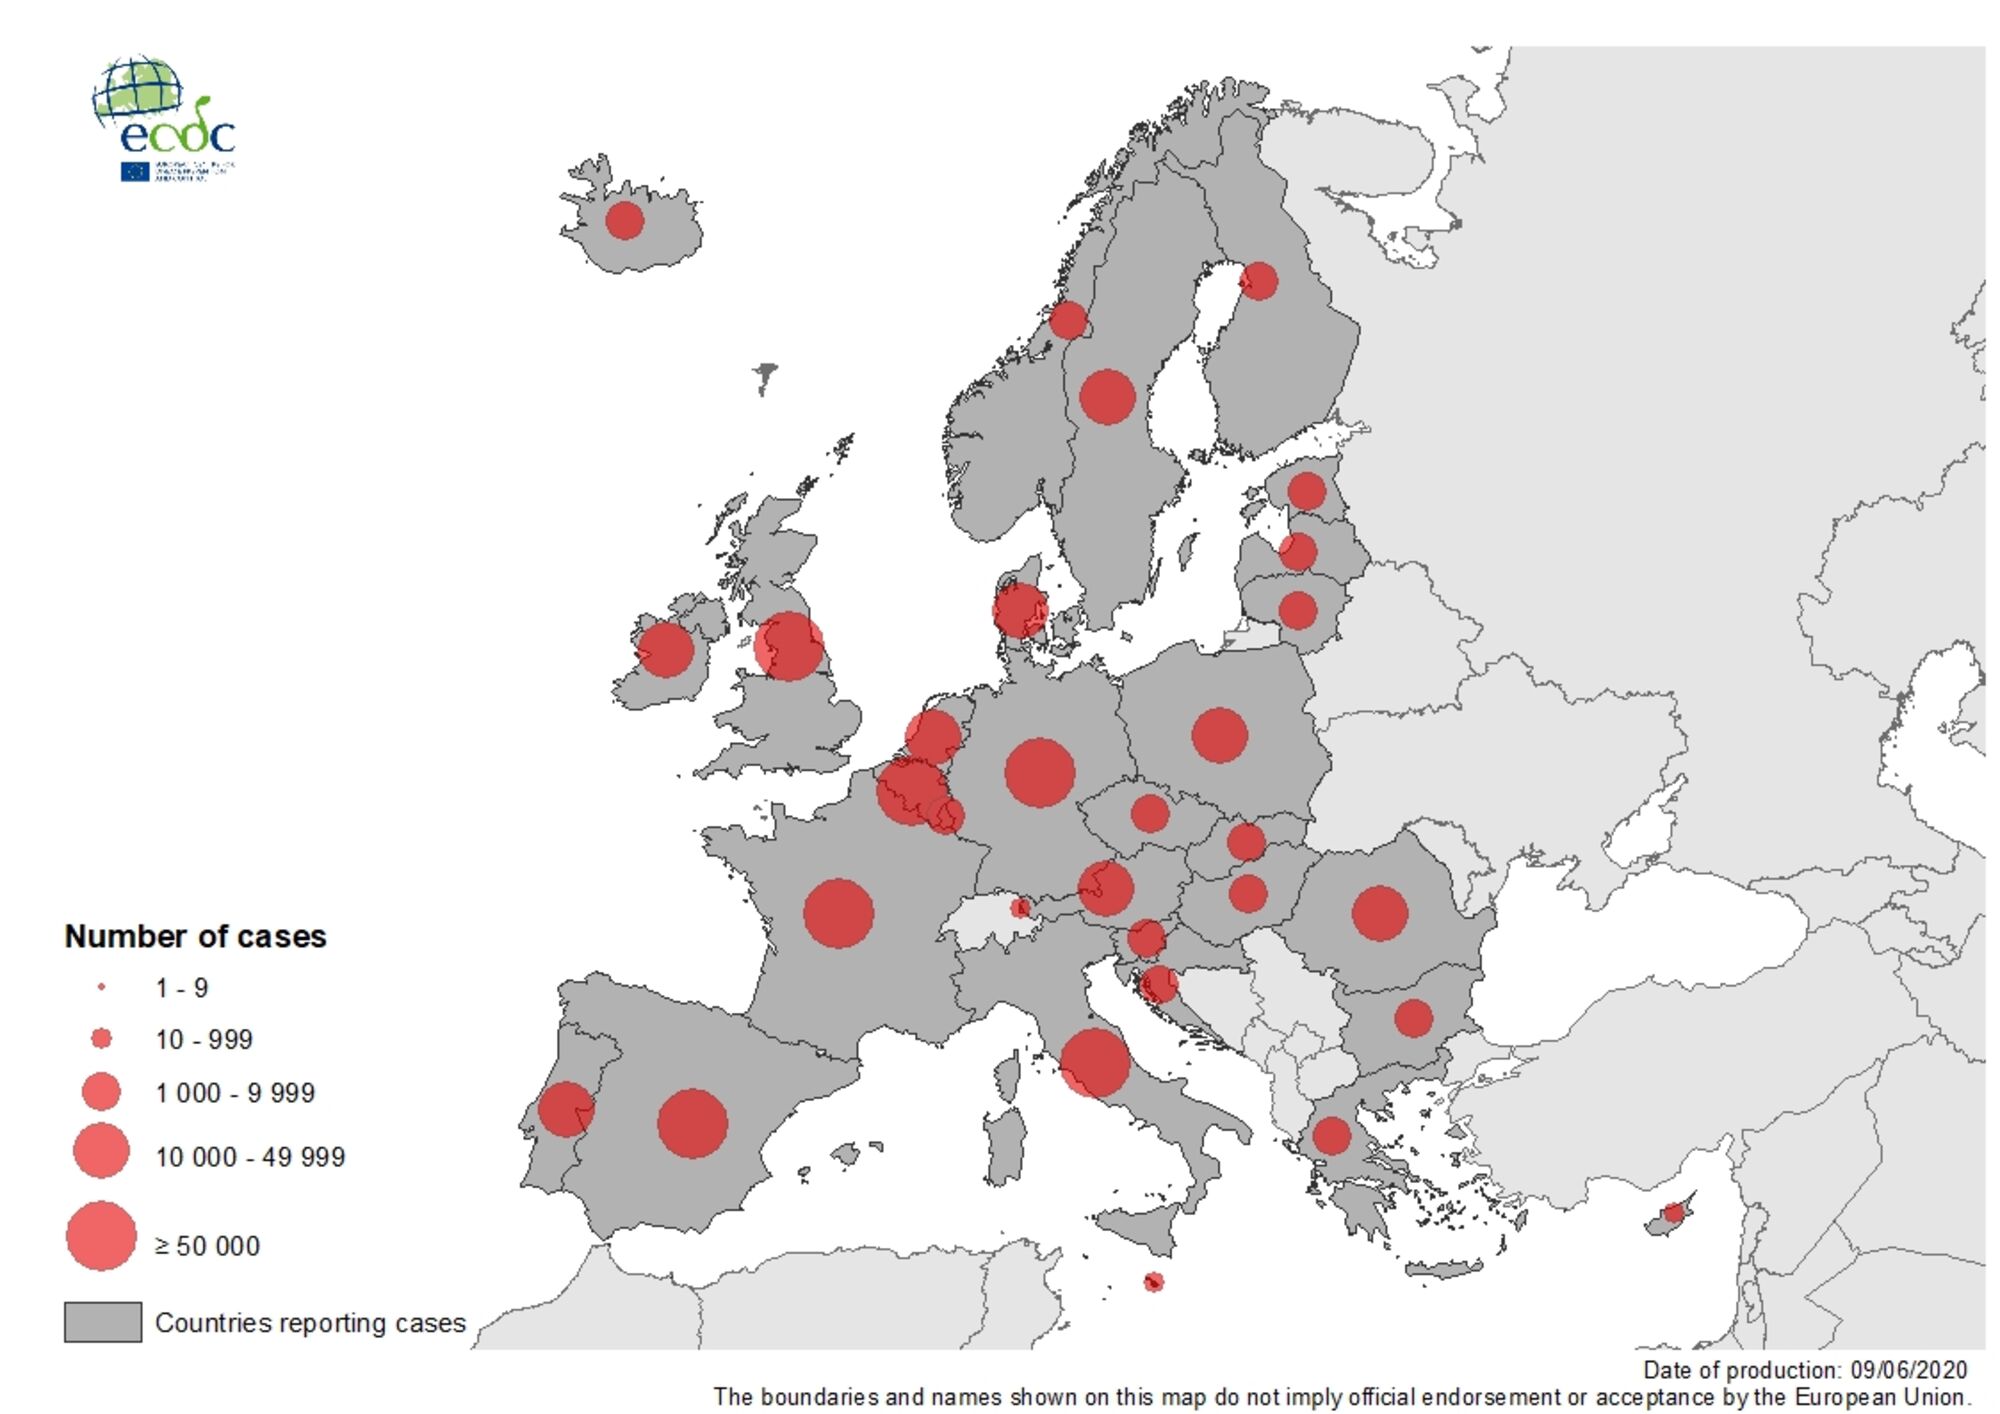 COVID-19 Cases in the EU/EEA and the UK, as of 9 June 2020